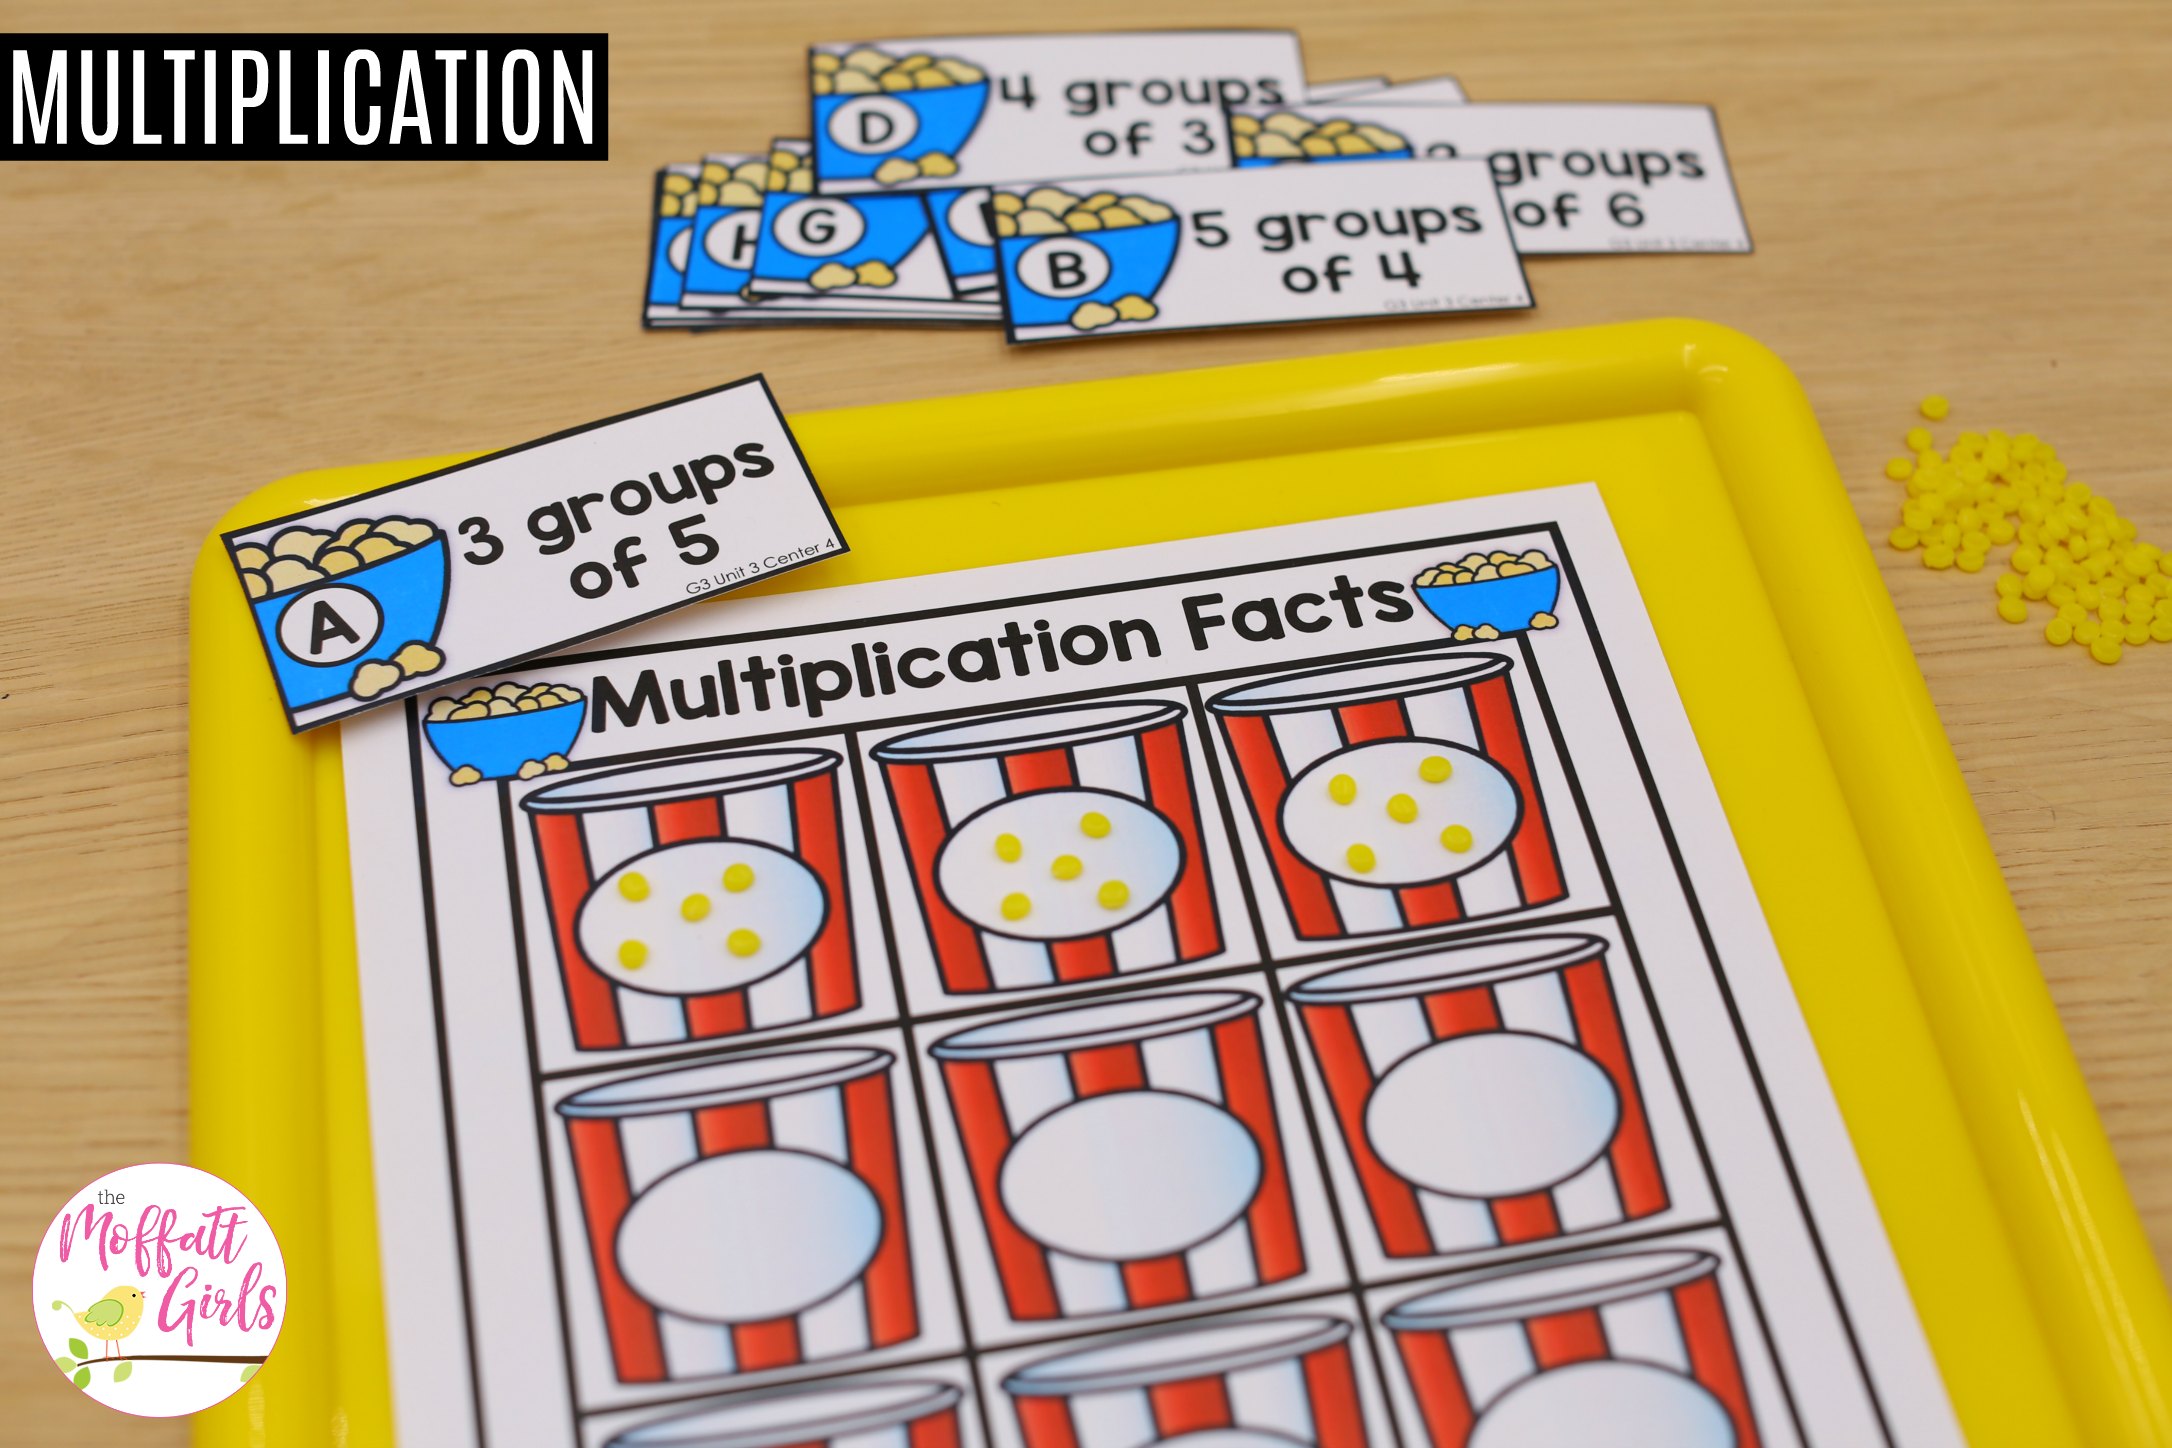 3rd-grade-math-multiplication-and-division-part-1-hands-on-fun